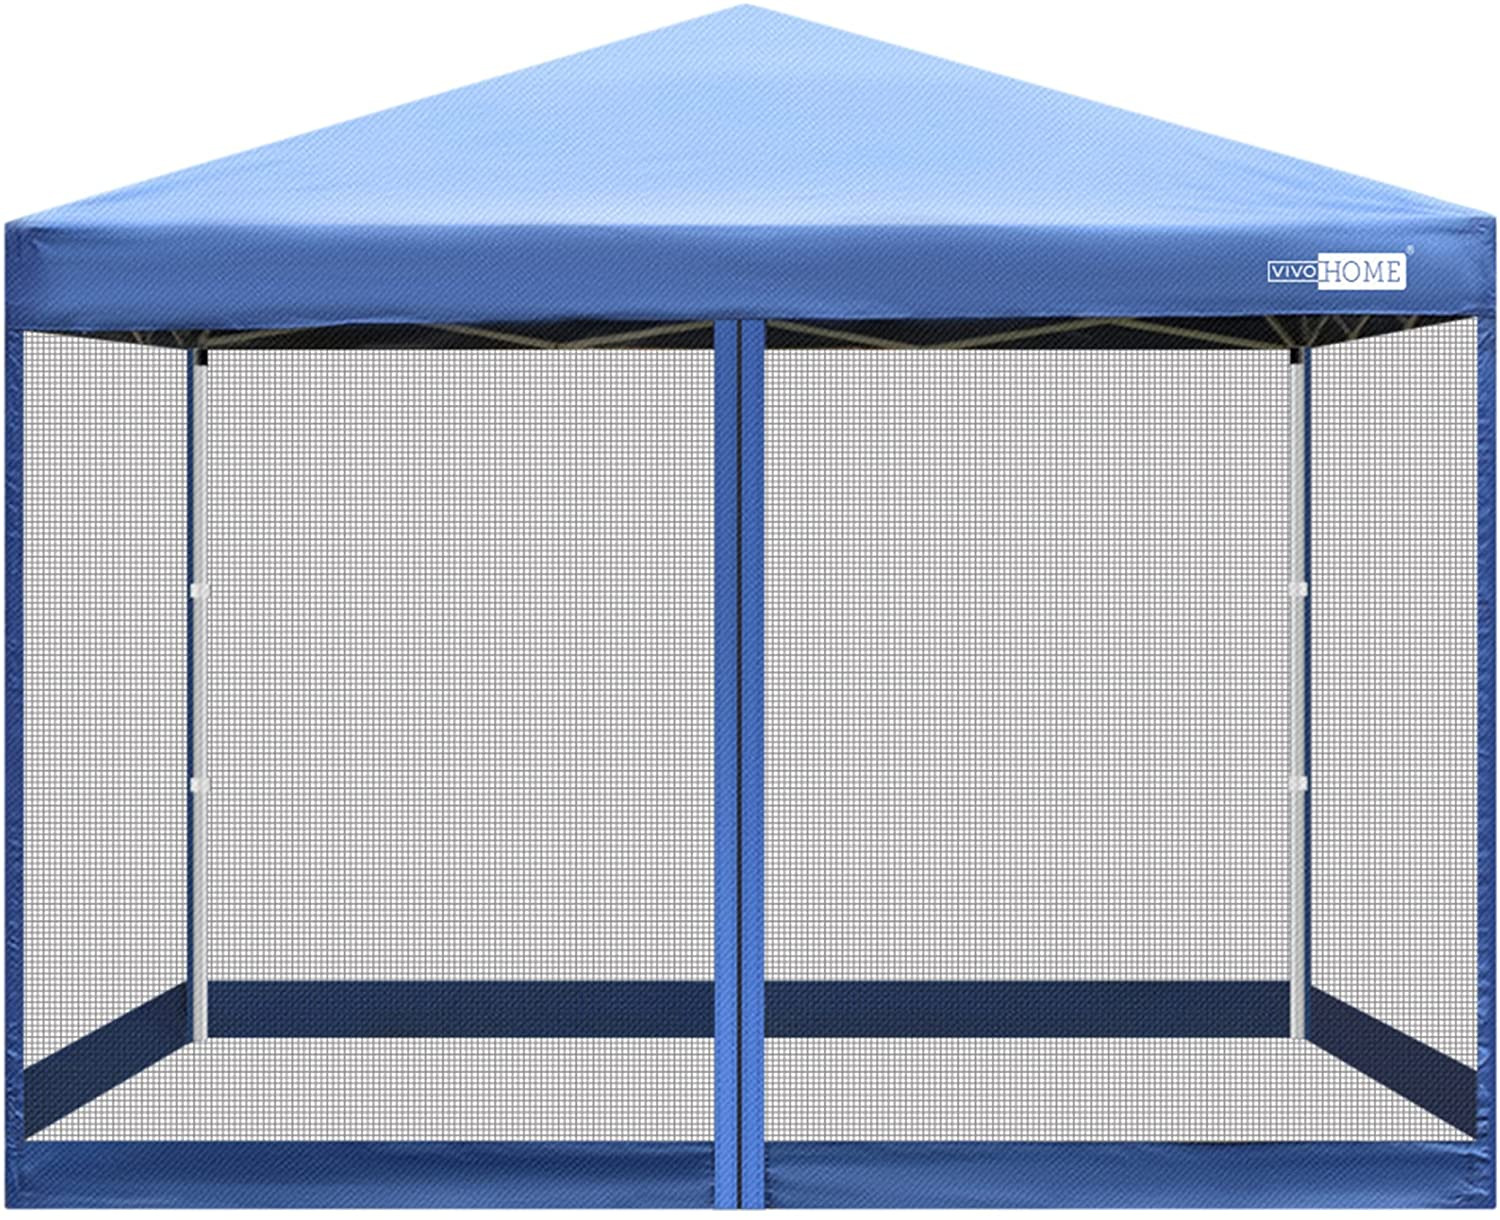 210D Oxford Outdoor Easy Pop up Canopy Screen Party Tent with Mesh Side Walls (8